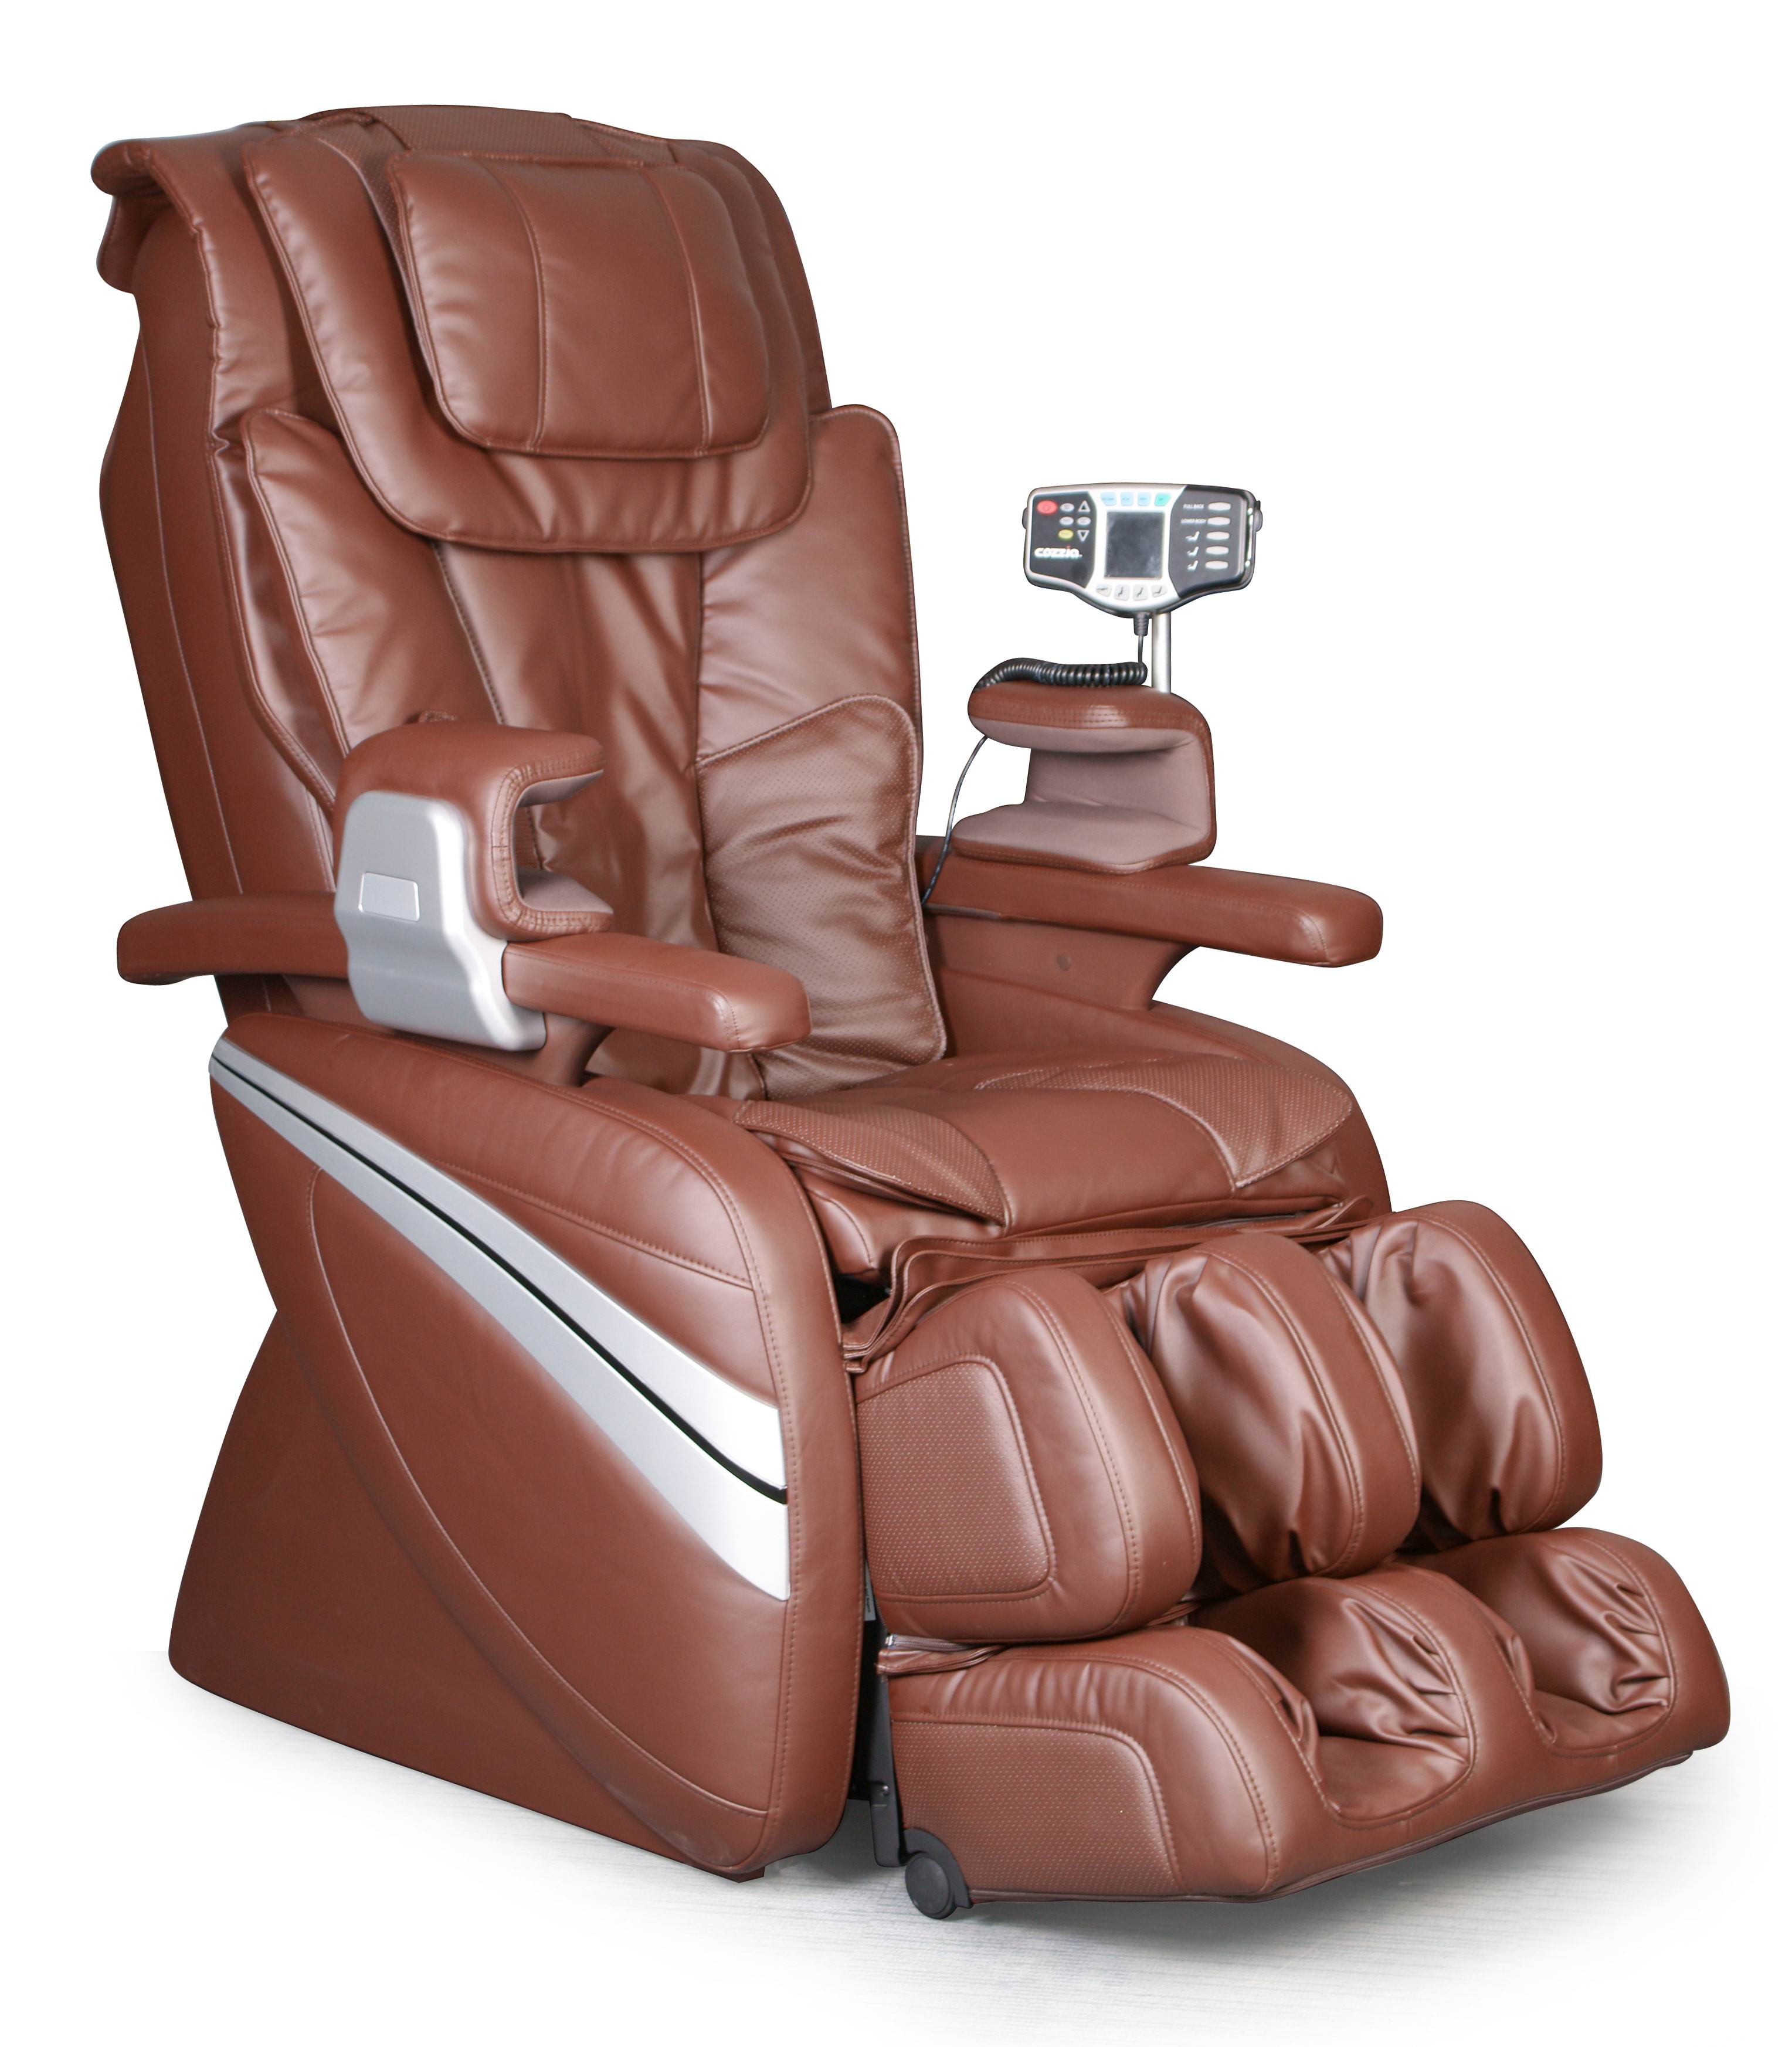 Massage Chair Reliefcom Introduces The Cozzia Line Of Massage Chairs